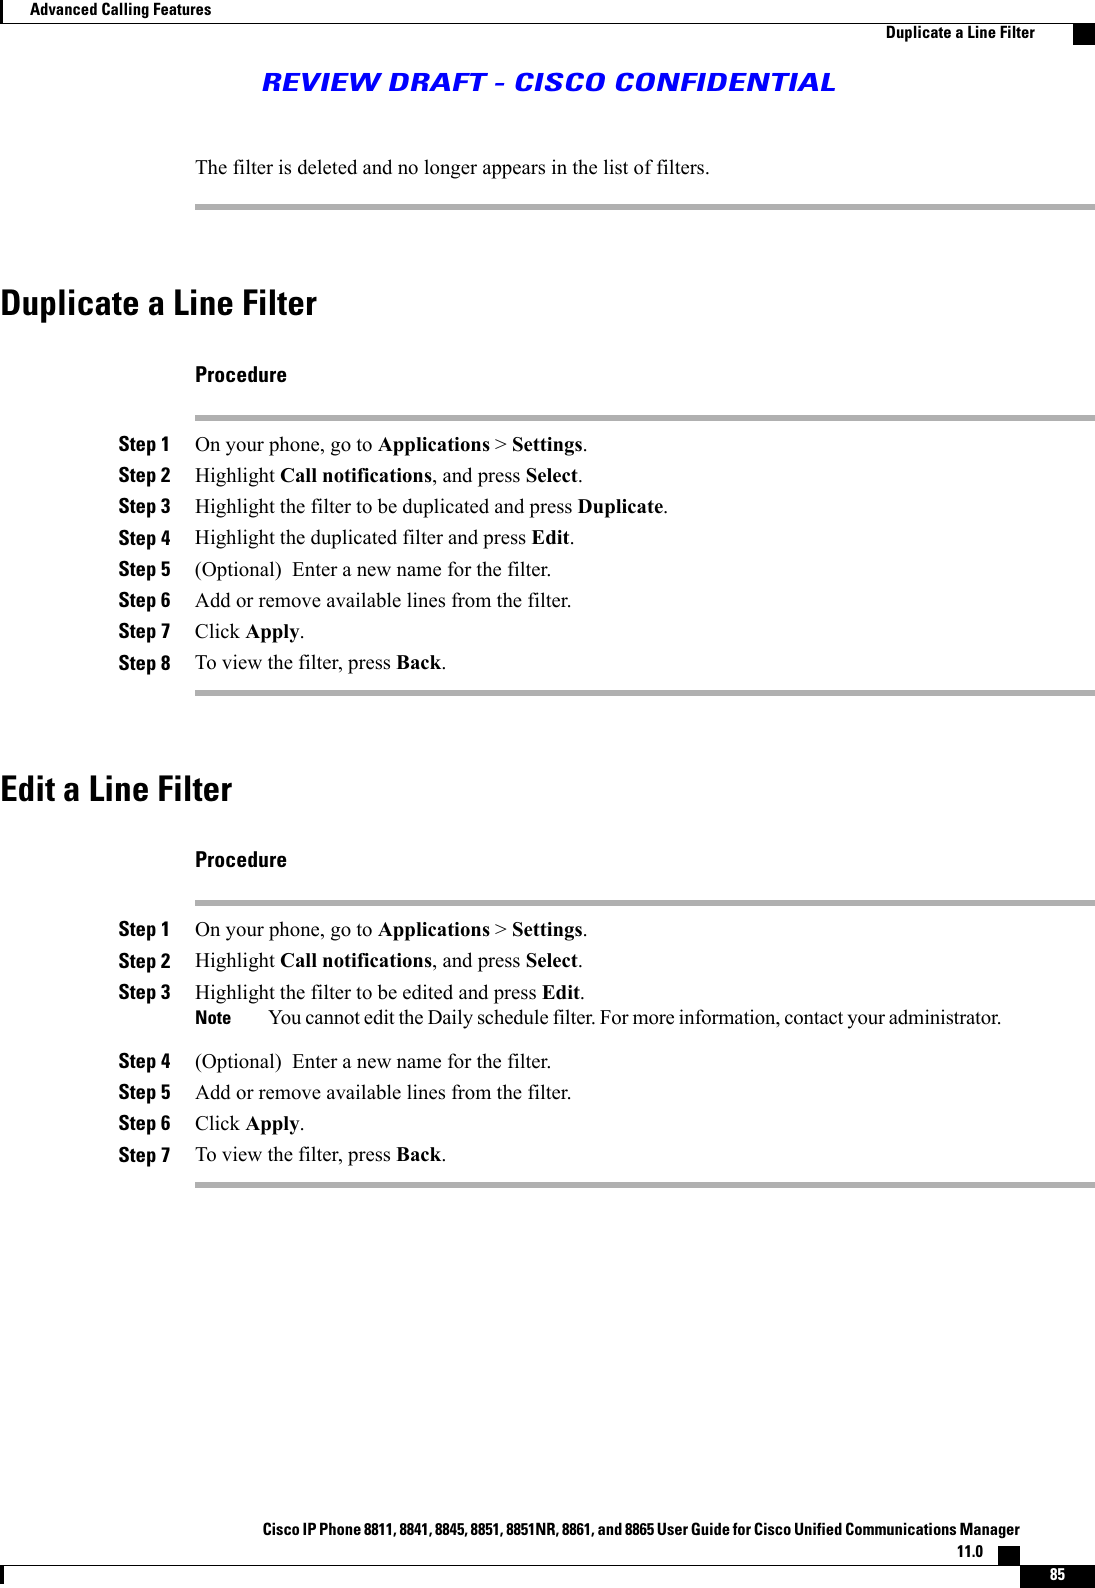 The filter is deleted and no longer appears in the list of filters.Duplicate a Line FilterProcedureStep 1 On your phone, go to Applications &gt;Settings.Step 2 Highlight Call notifications, and press Select.Step 3 Highlight the filter to be duplicated and press Duplicate.Step 4 Highlight the duplicated filter and press Edit.Step 5 (Optional) Enter a new name for the filter.Step 6 Add or remove available lines from the filter.Step 7 Click Apply.Step 8 To view the filter, press Back.Edit a Line FilterProcedureStep 1 On your phone, go to Applications &gt;Settings.Step 2 Highlight Call notifications, and press Select.Step 3 Highlight the filter to be edited and press Edit.You cannot edit the Daily schedule filter. For more information, contact your administrator.NoteStep 4 (Optional) Enter a new name for the filter.Step 5 Add or remove available lines from the filter.Step 6 Click Apply.Step 7 To view the filter, press Back.Cisco IP Phone 8811, 8841, 8845, 8851, 8851NR, 8861, and 8865 User Guide for Cisco Unified Communications Manager11.0    85Advanced Calling FeaturesDuplicate a Line FilterREVIEW DRAFT - CISCO CONFIDENTIAL